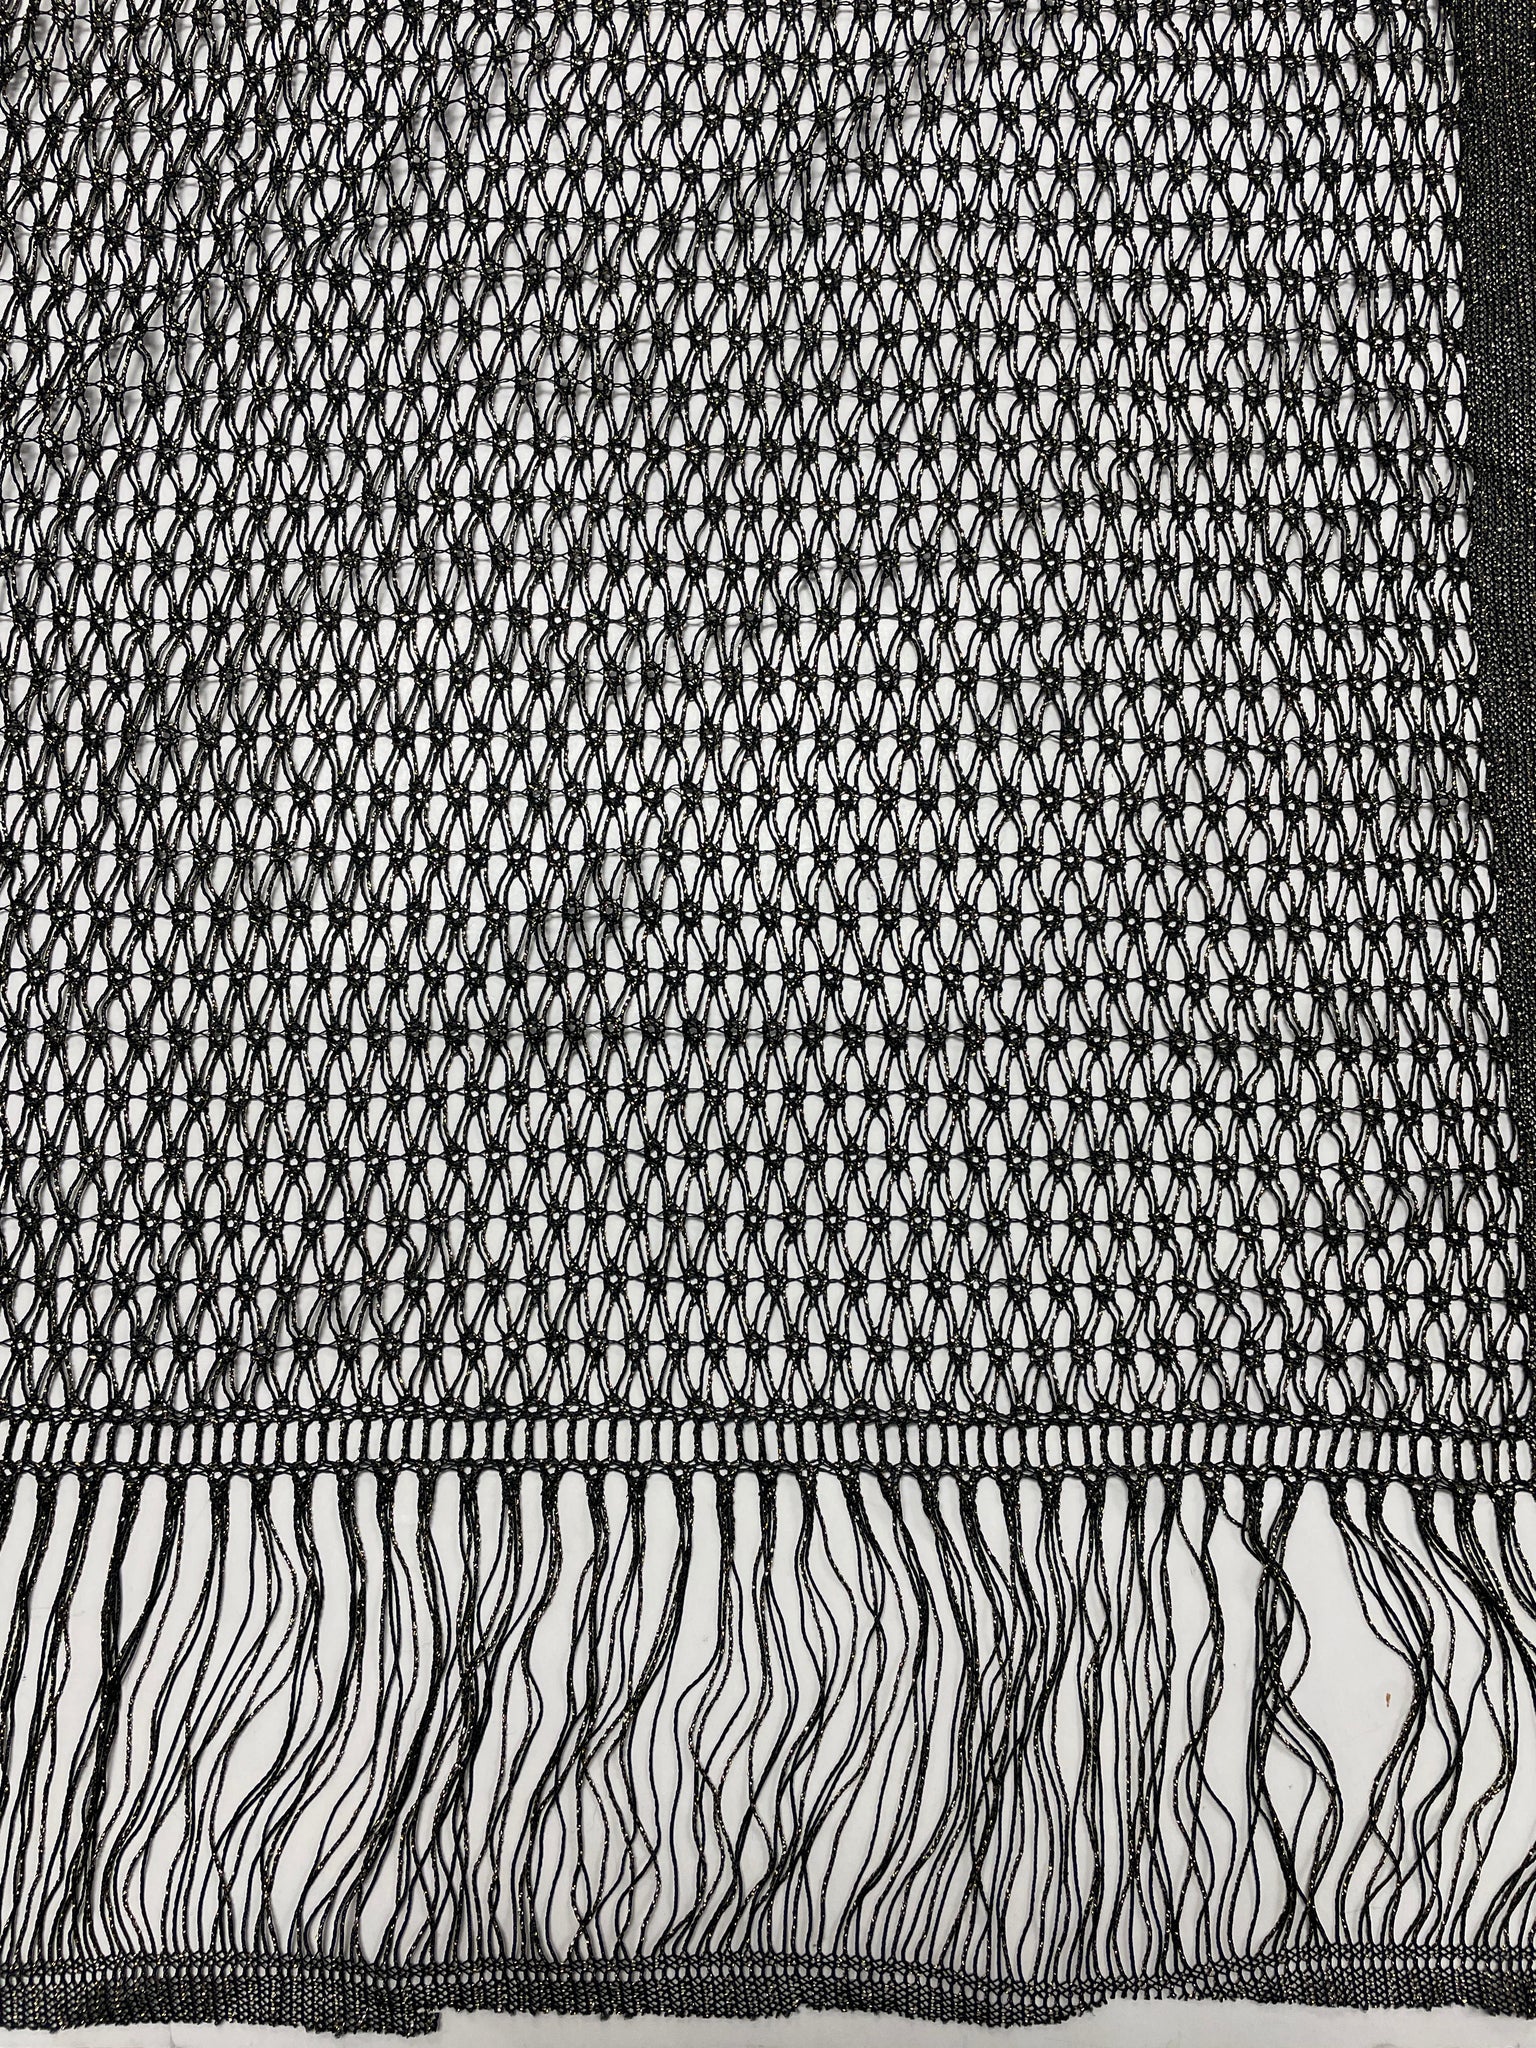 2 YD Polyester Net Panel with Fringe - Black with Gold Lurex and Self Fringe